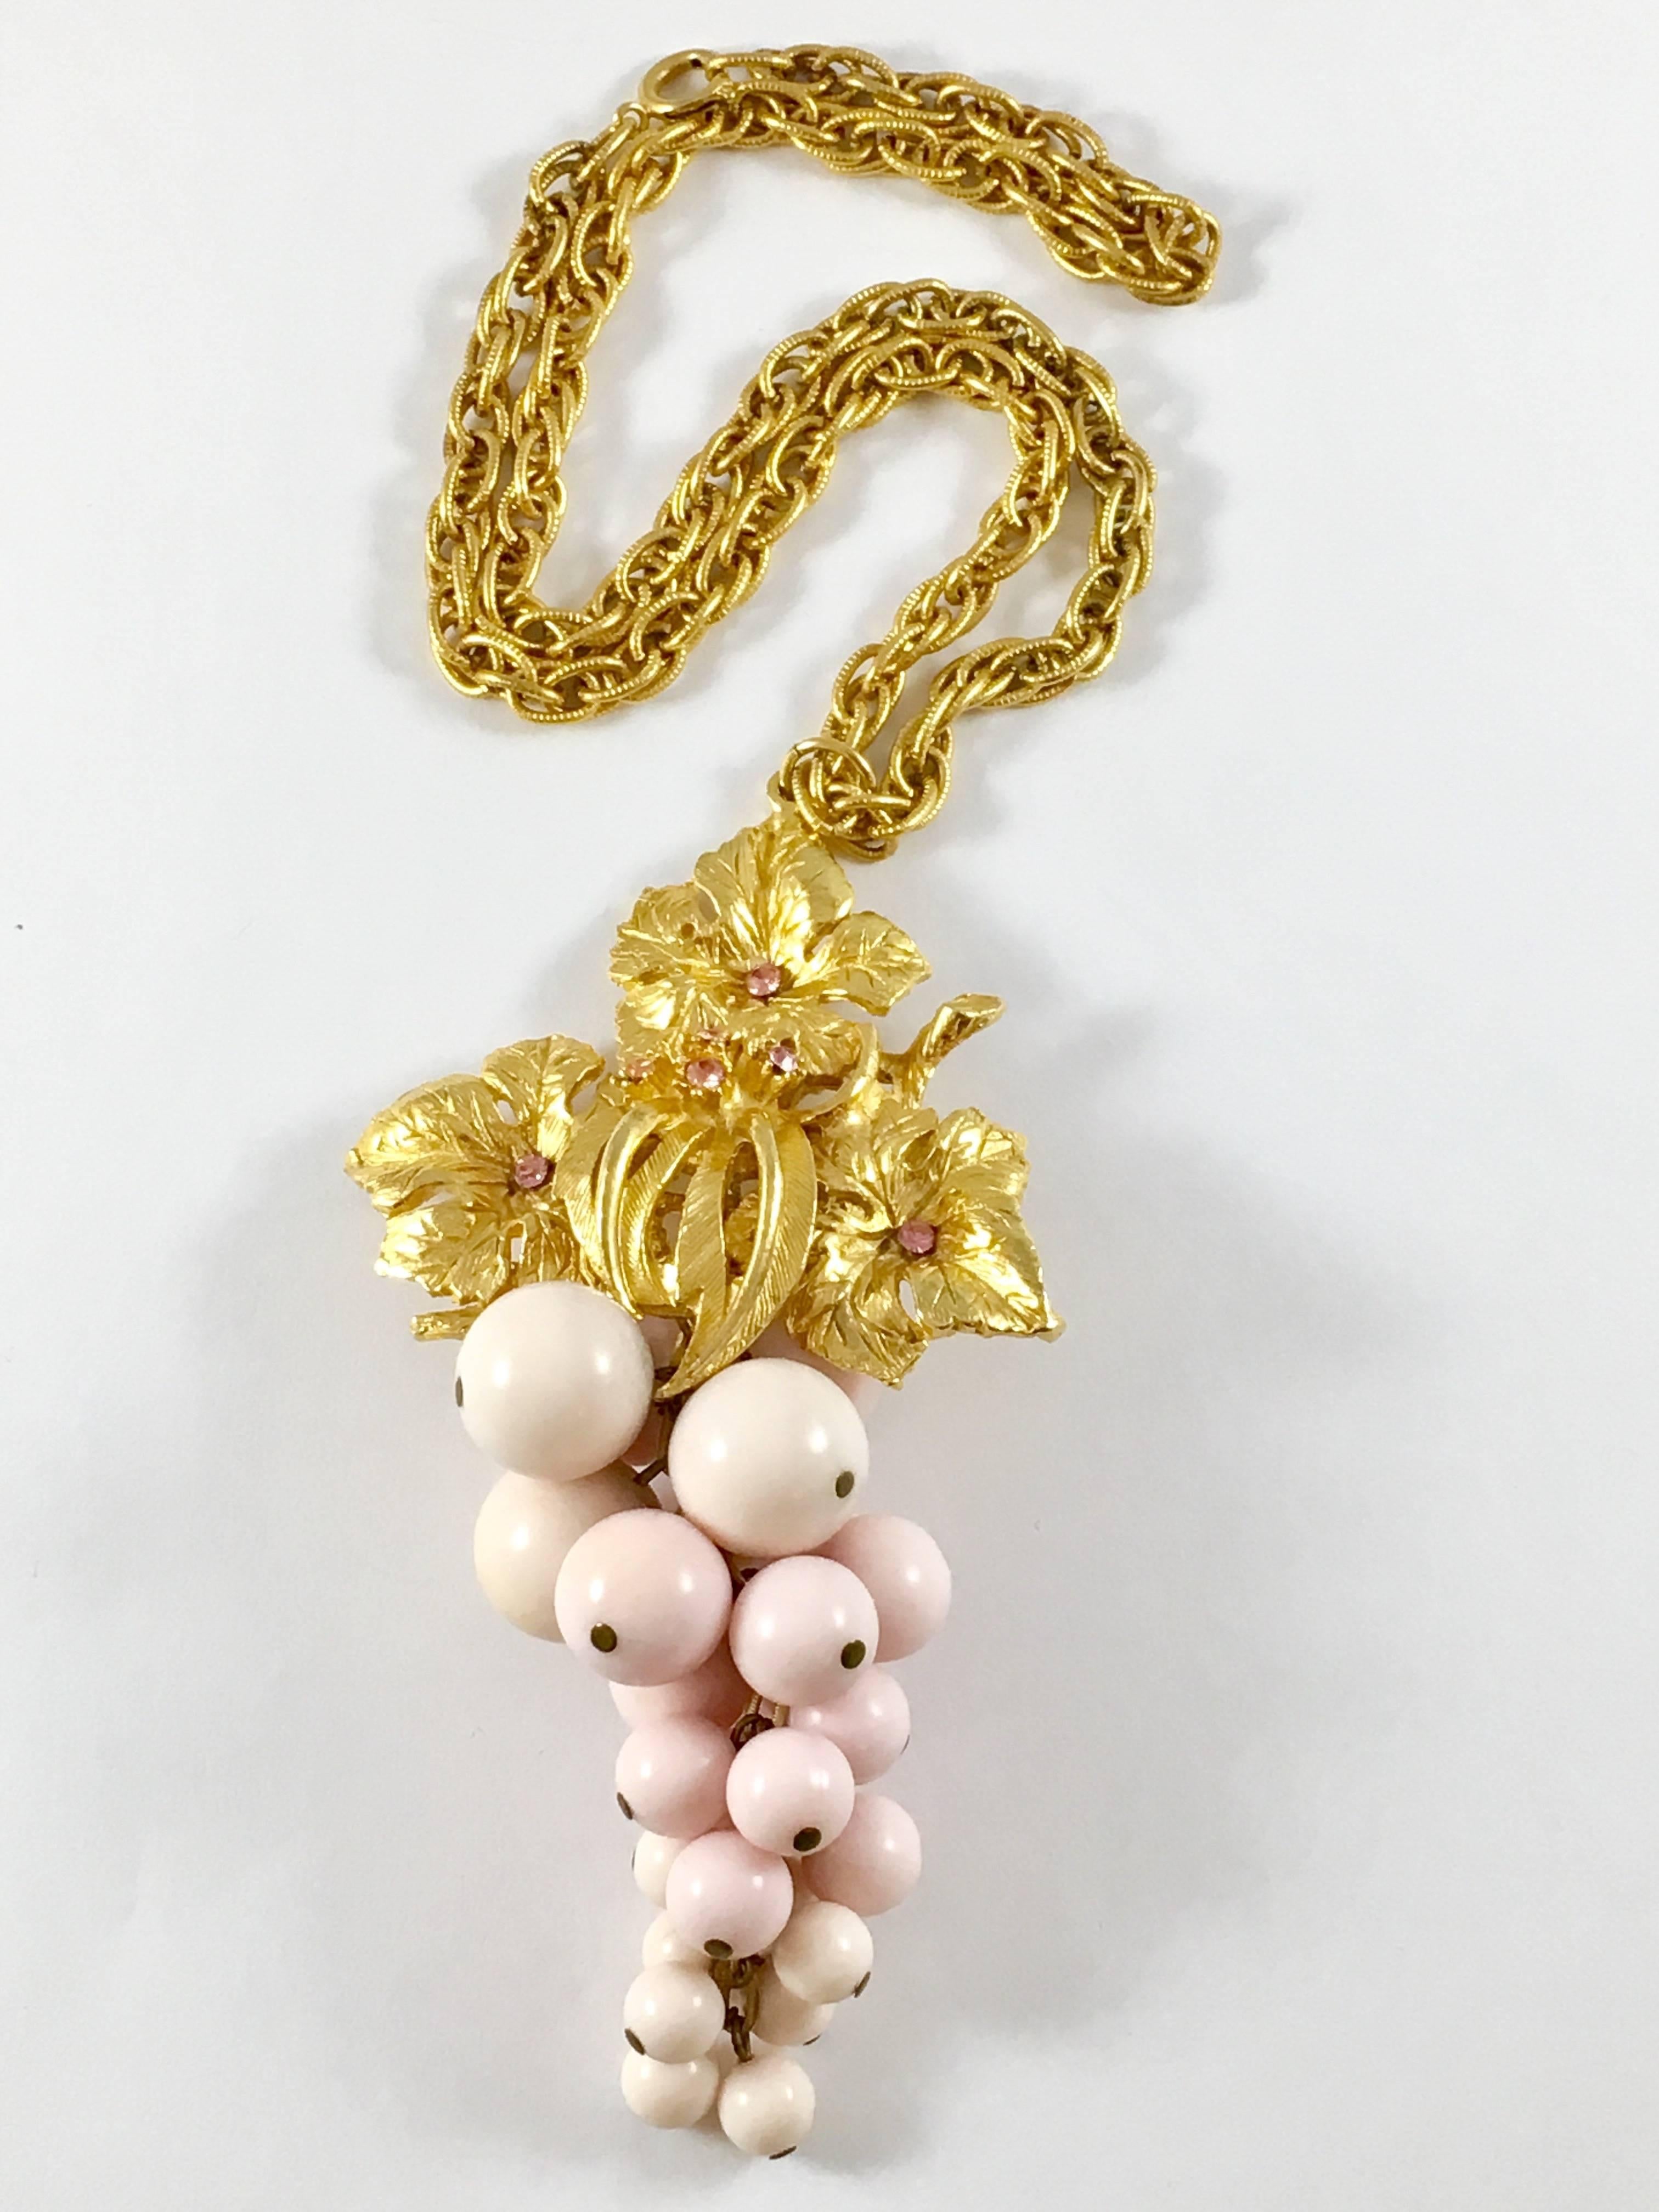 This is a fabulous, really fun 1950s grape pendant necklace made by Alice Caviness. The grapes are made out of resin and are a pale pink color. The grape leaves are gold-toned with pink rhinestones. The pendant measures 5 inches long and 2 1/2